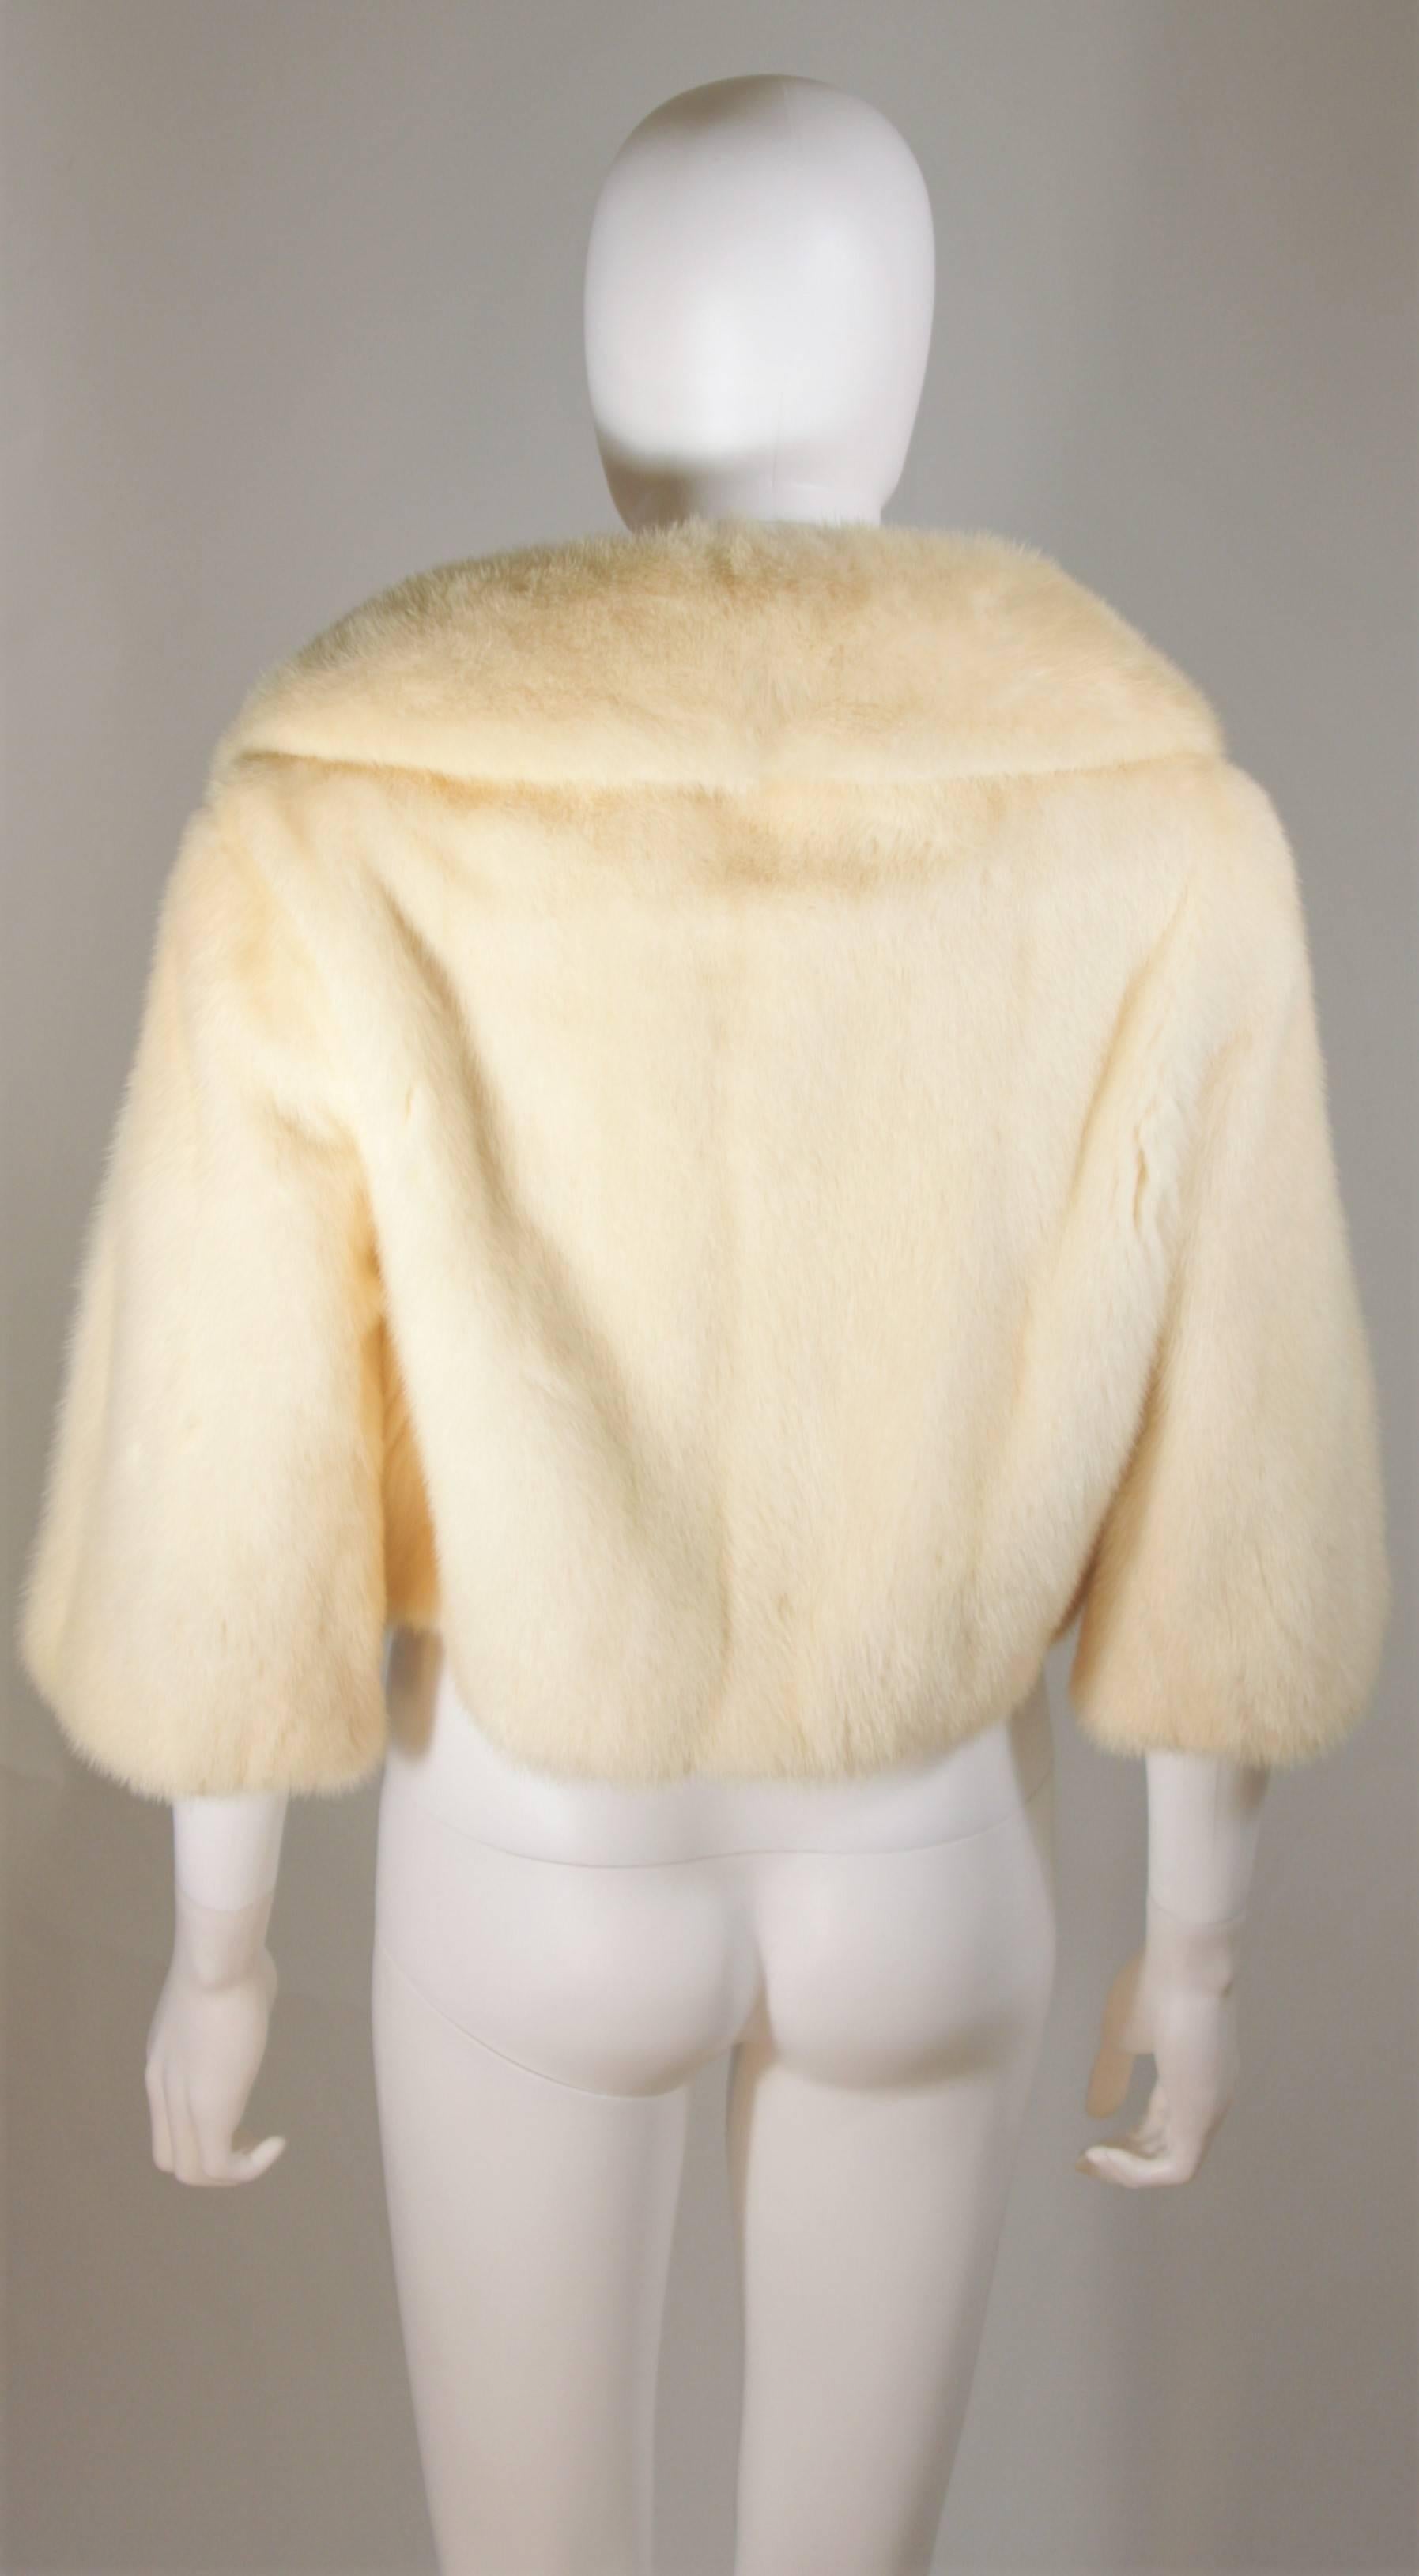 OLEG CASSINI Cream Mink Jacket with Rhinestone & Faux Pearl Buttons Size 6-8 For Sale 3